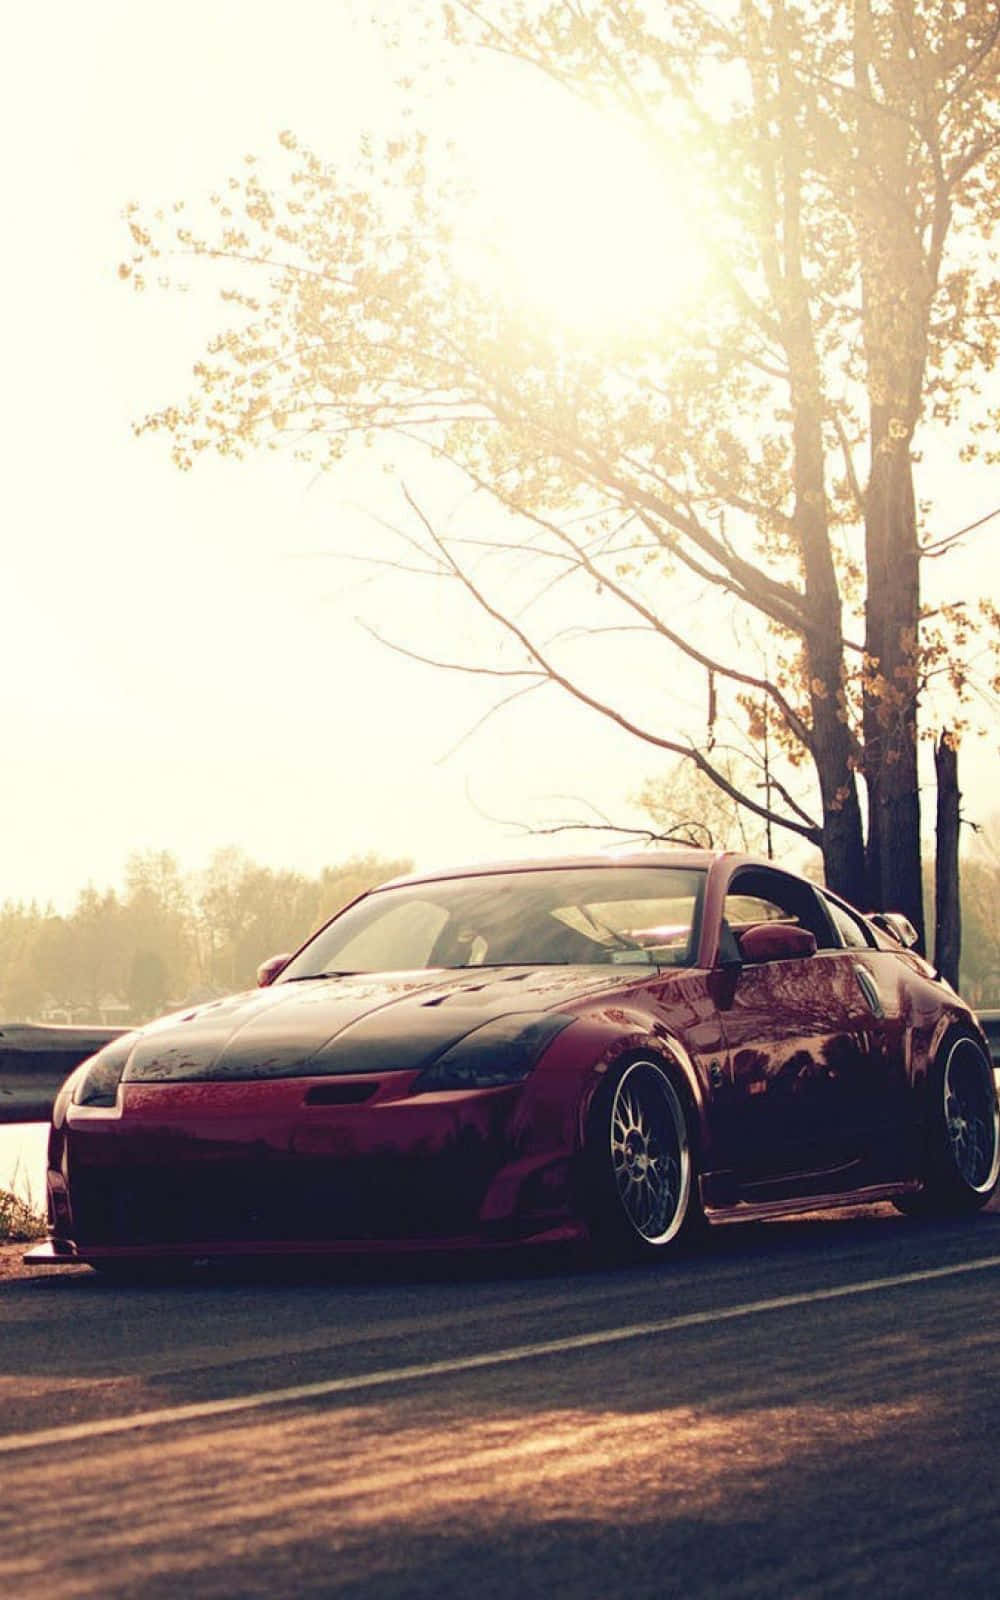 Road trip ready with the Nissan 350z. Wallpaper